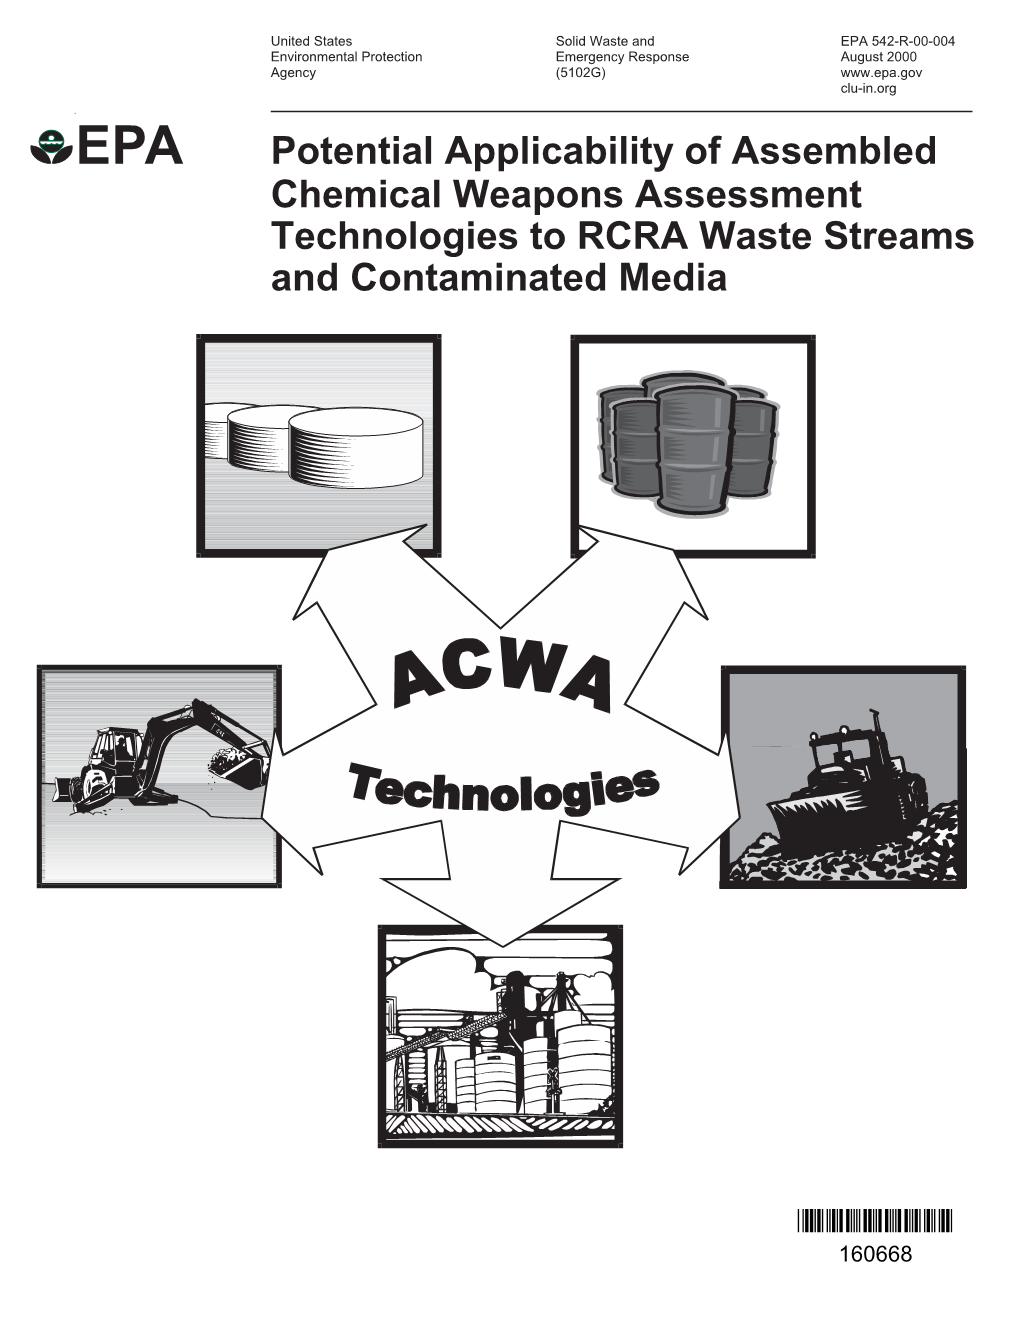 Potential Applicability of Assembled Chemical Weapons Assessment Technologies to RCRA Waste Streams and Contaminated Media EPA 542-R-00-004 August 2000